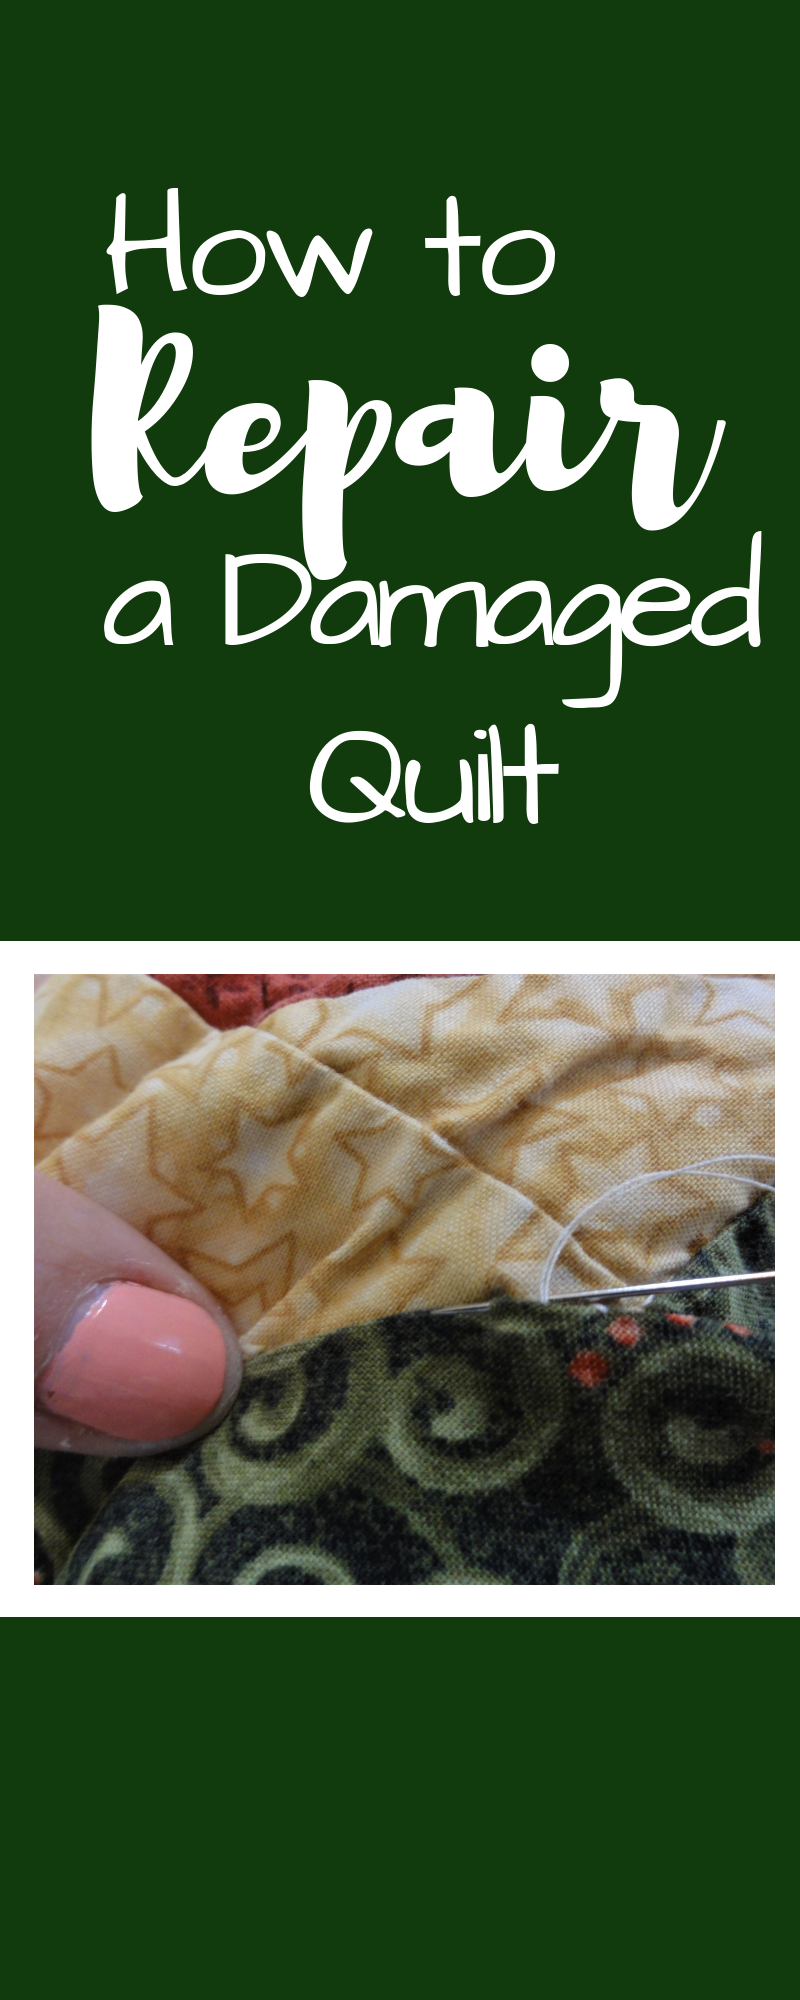 How to Repair a Damaged Quilt -   19 fabric crafts inspiration
 ideas